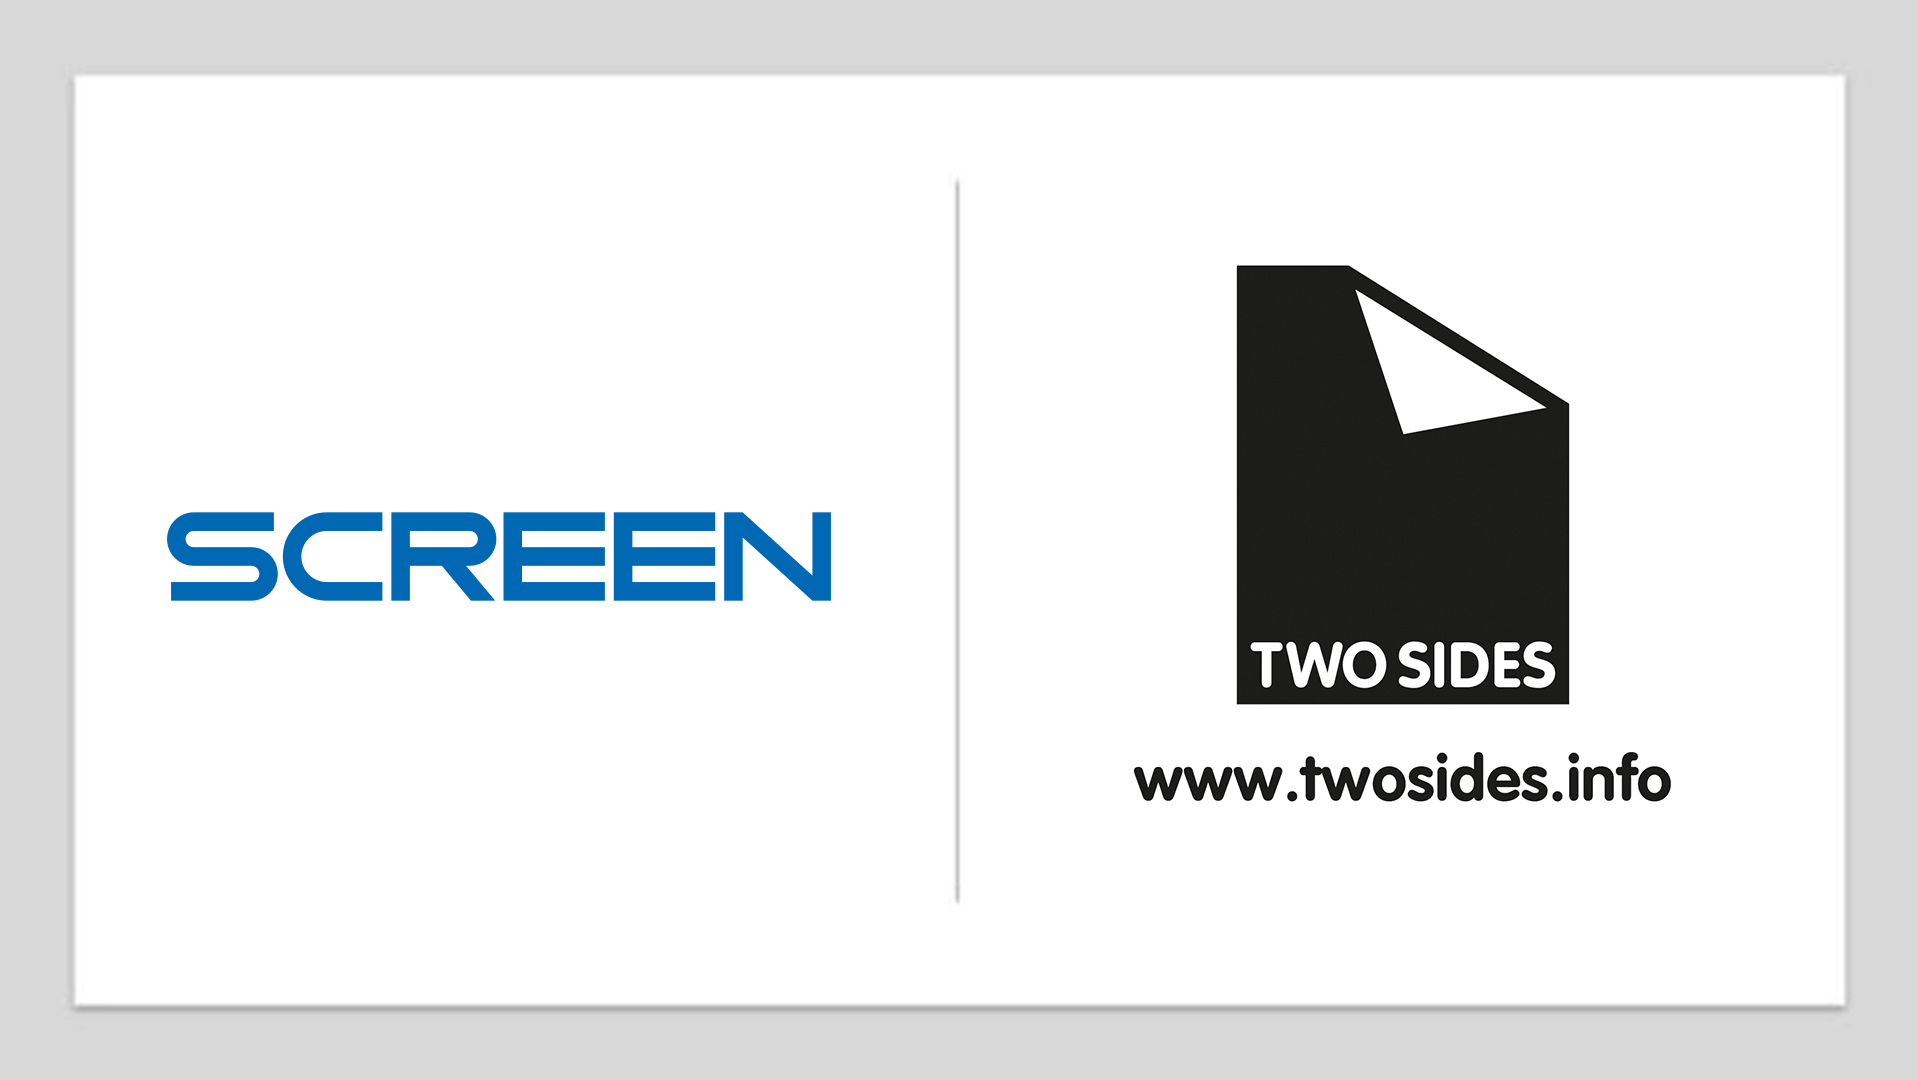 SCREEN Europe Joins Two Sides UK 